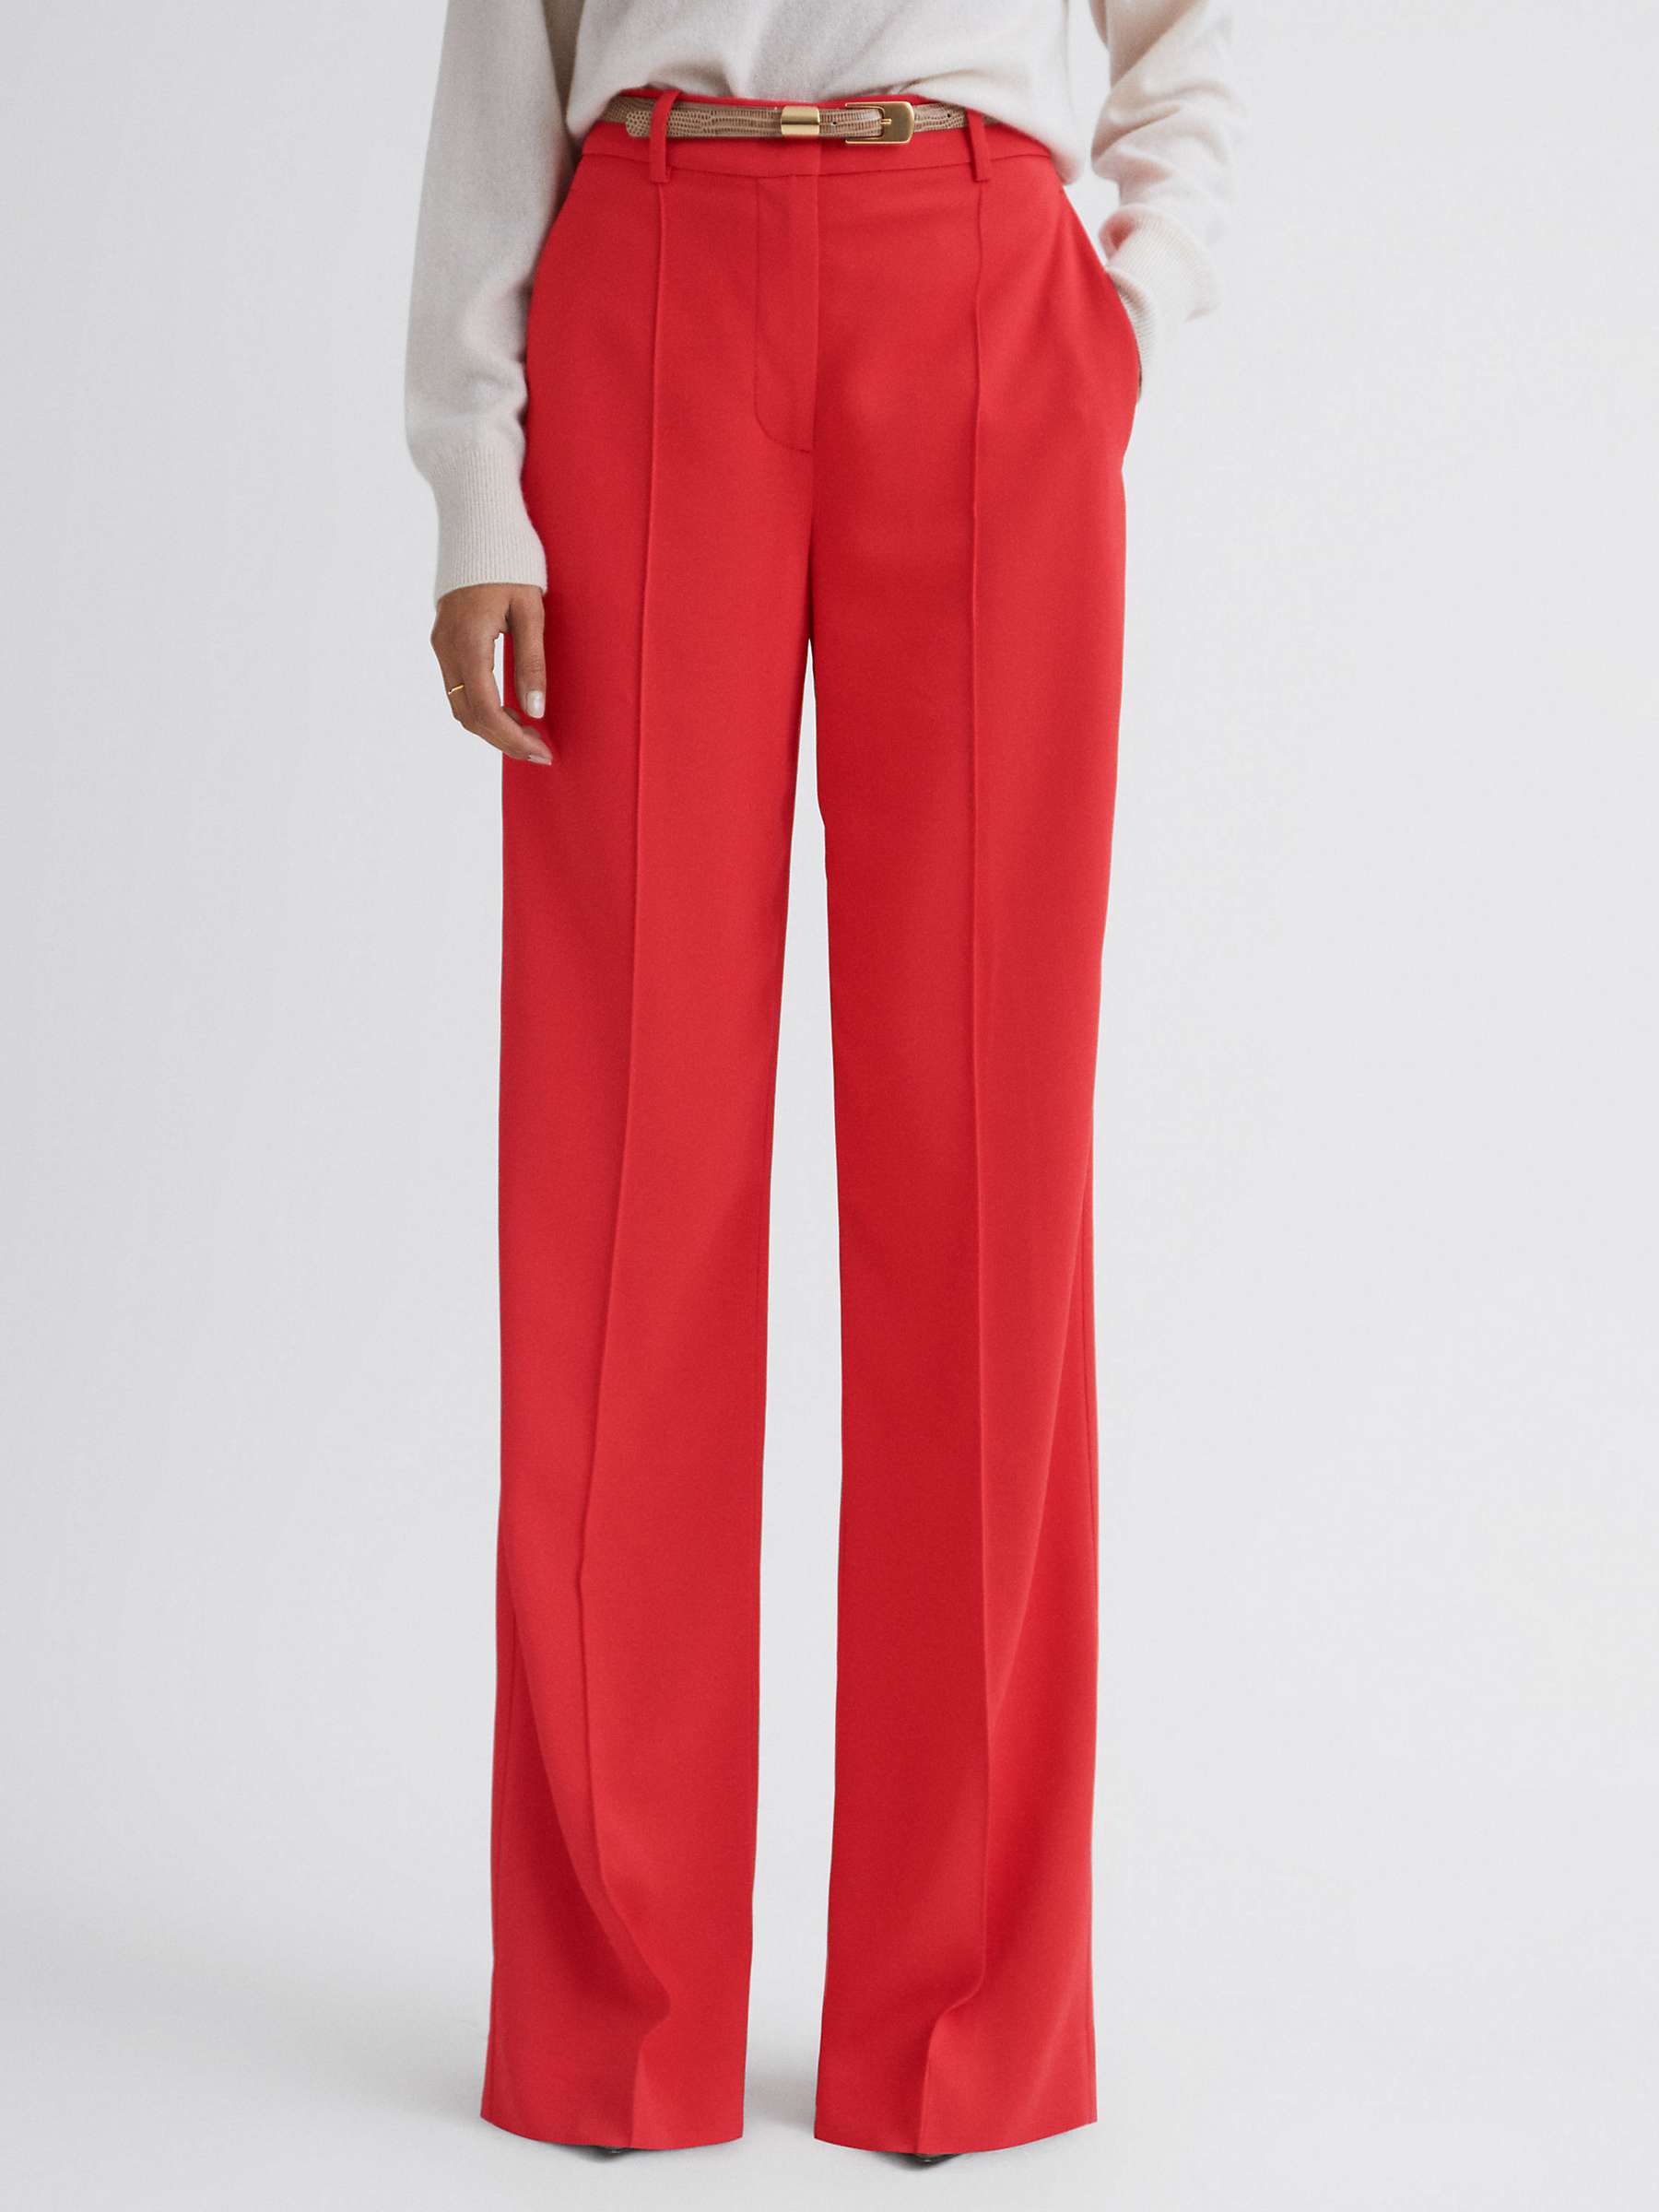 Buy Reiss Cara Wide Leg Trousers, Coral Online at johnlewis.com